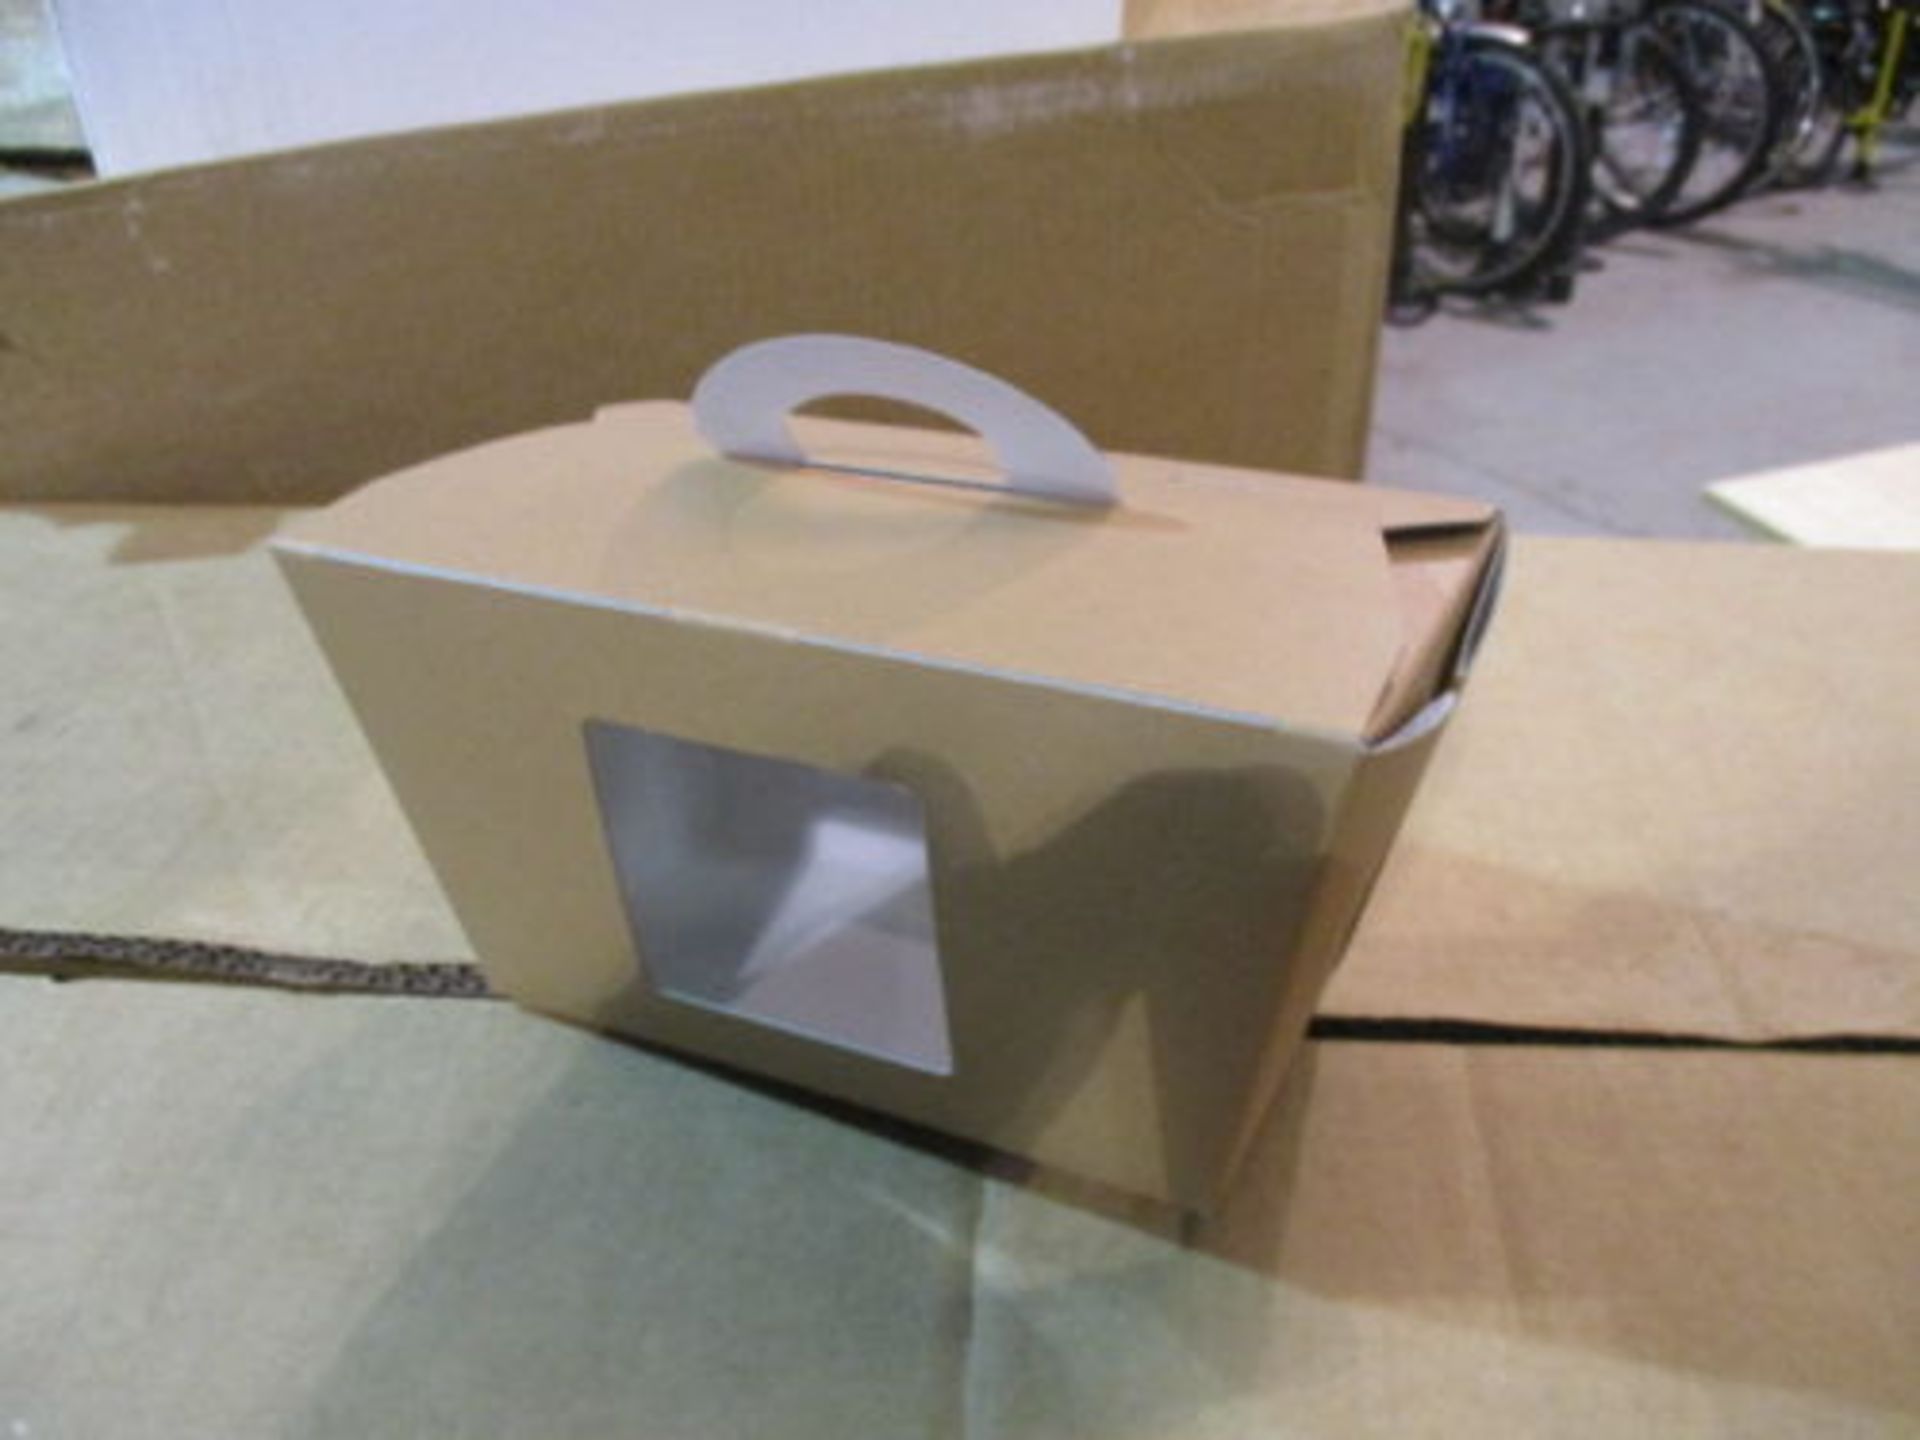 5 x Boxes of Disposable Catering Containers - Ideal for Salad, Rice, Sandwiches etc - Approx 1500